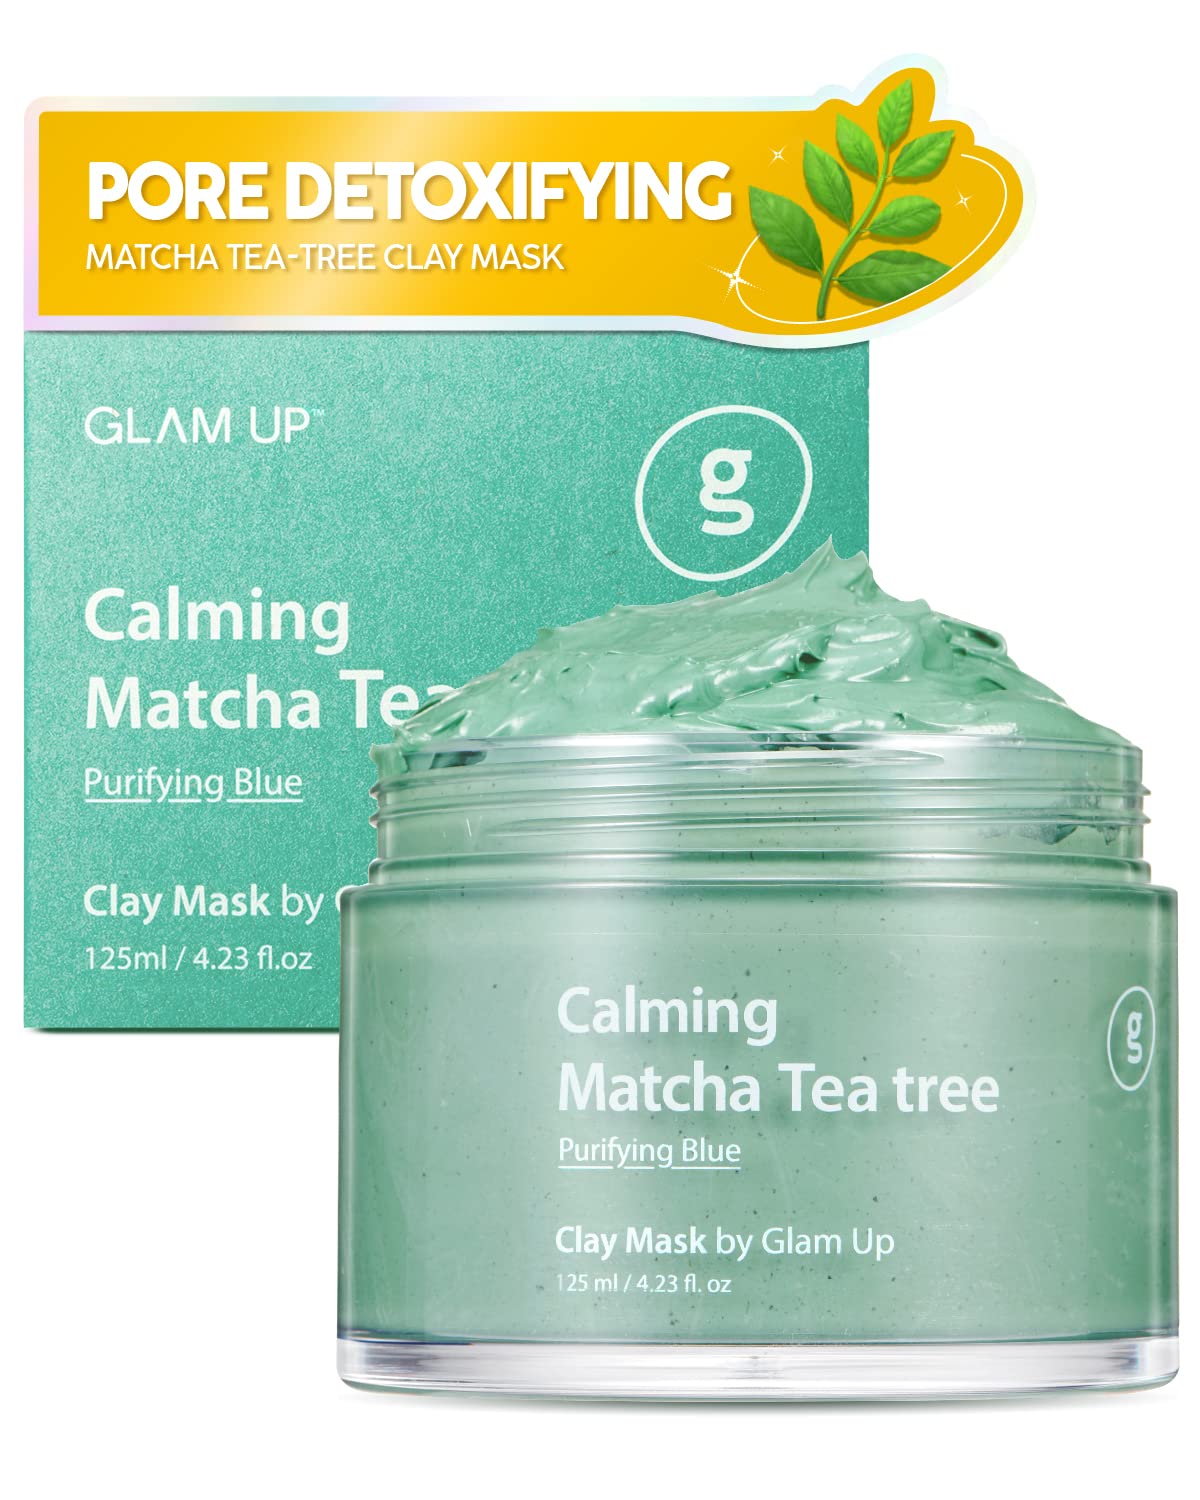 Super light weight mask with a great texture! I have very sensitive skin and I havent had any irritation! Smells like Tea Tree which is a plus:-)